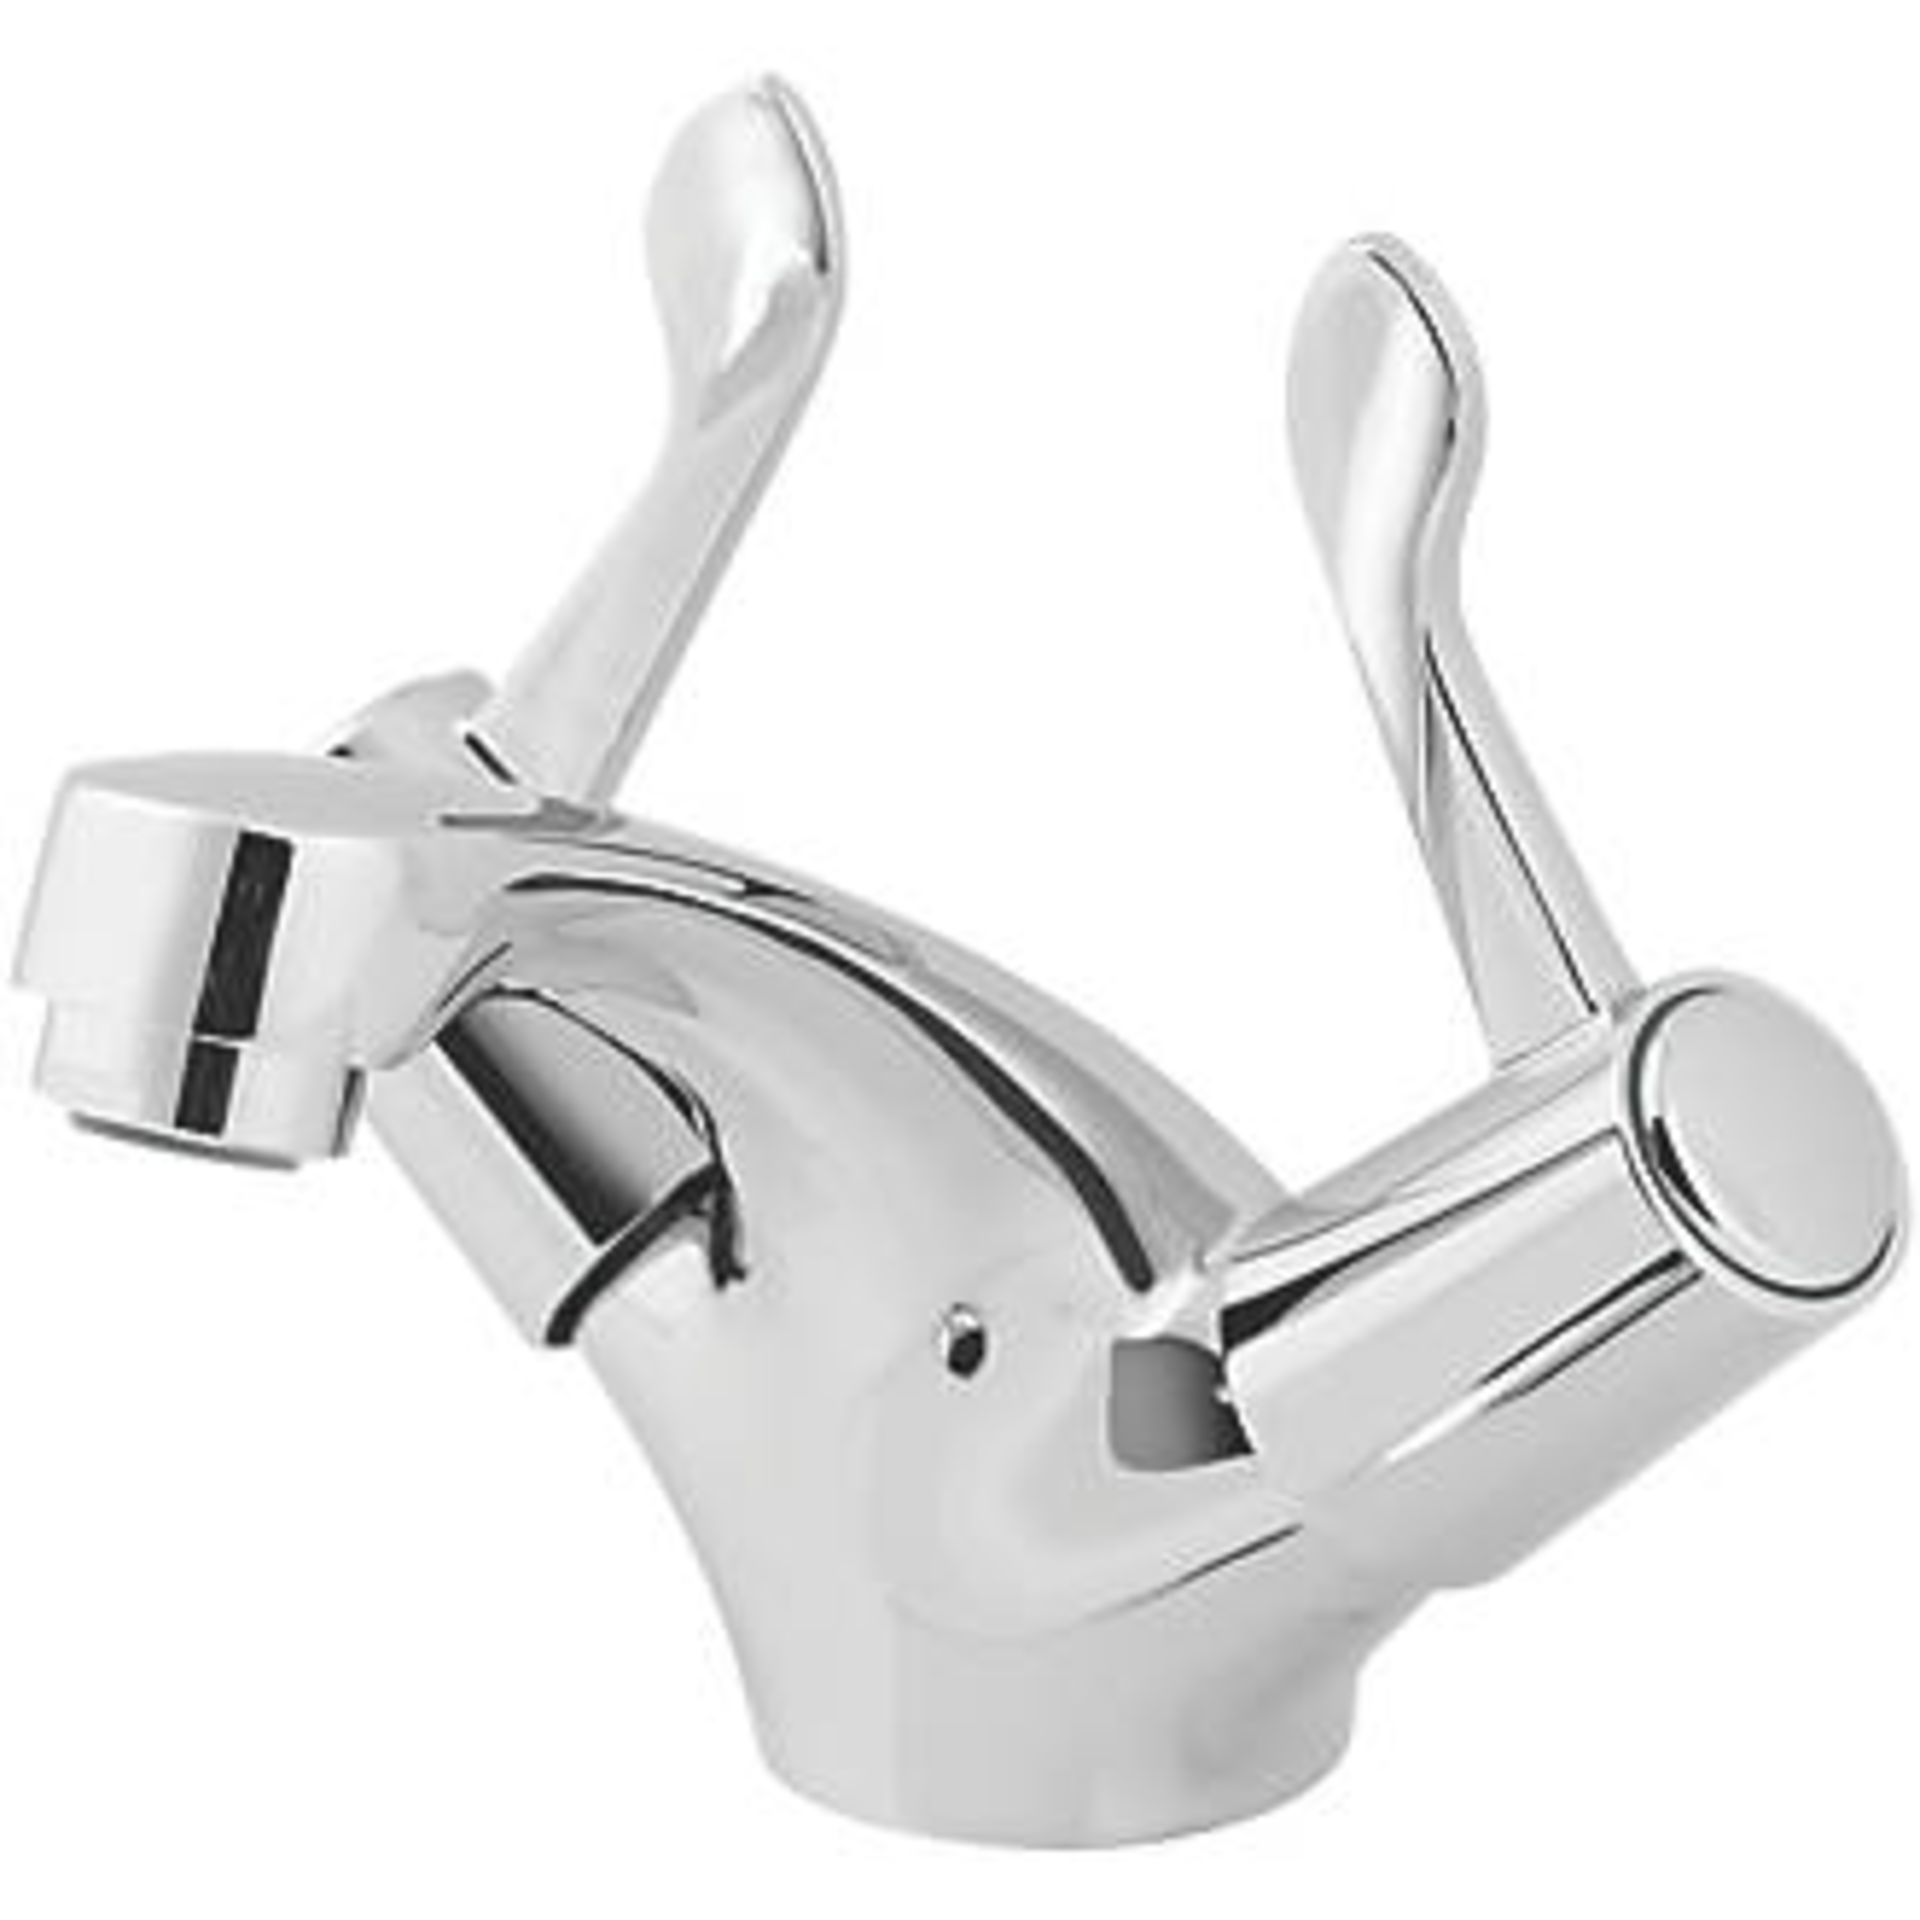 (AQ17) NETLEY BASIN MONO MIXER. Double Lever ¼ Turn Operation Suitable for High & Low Pressur...